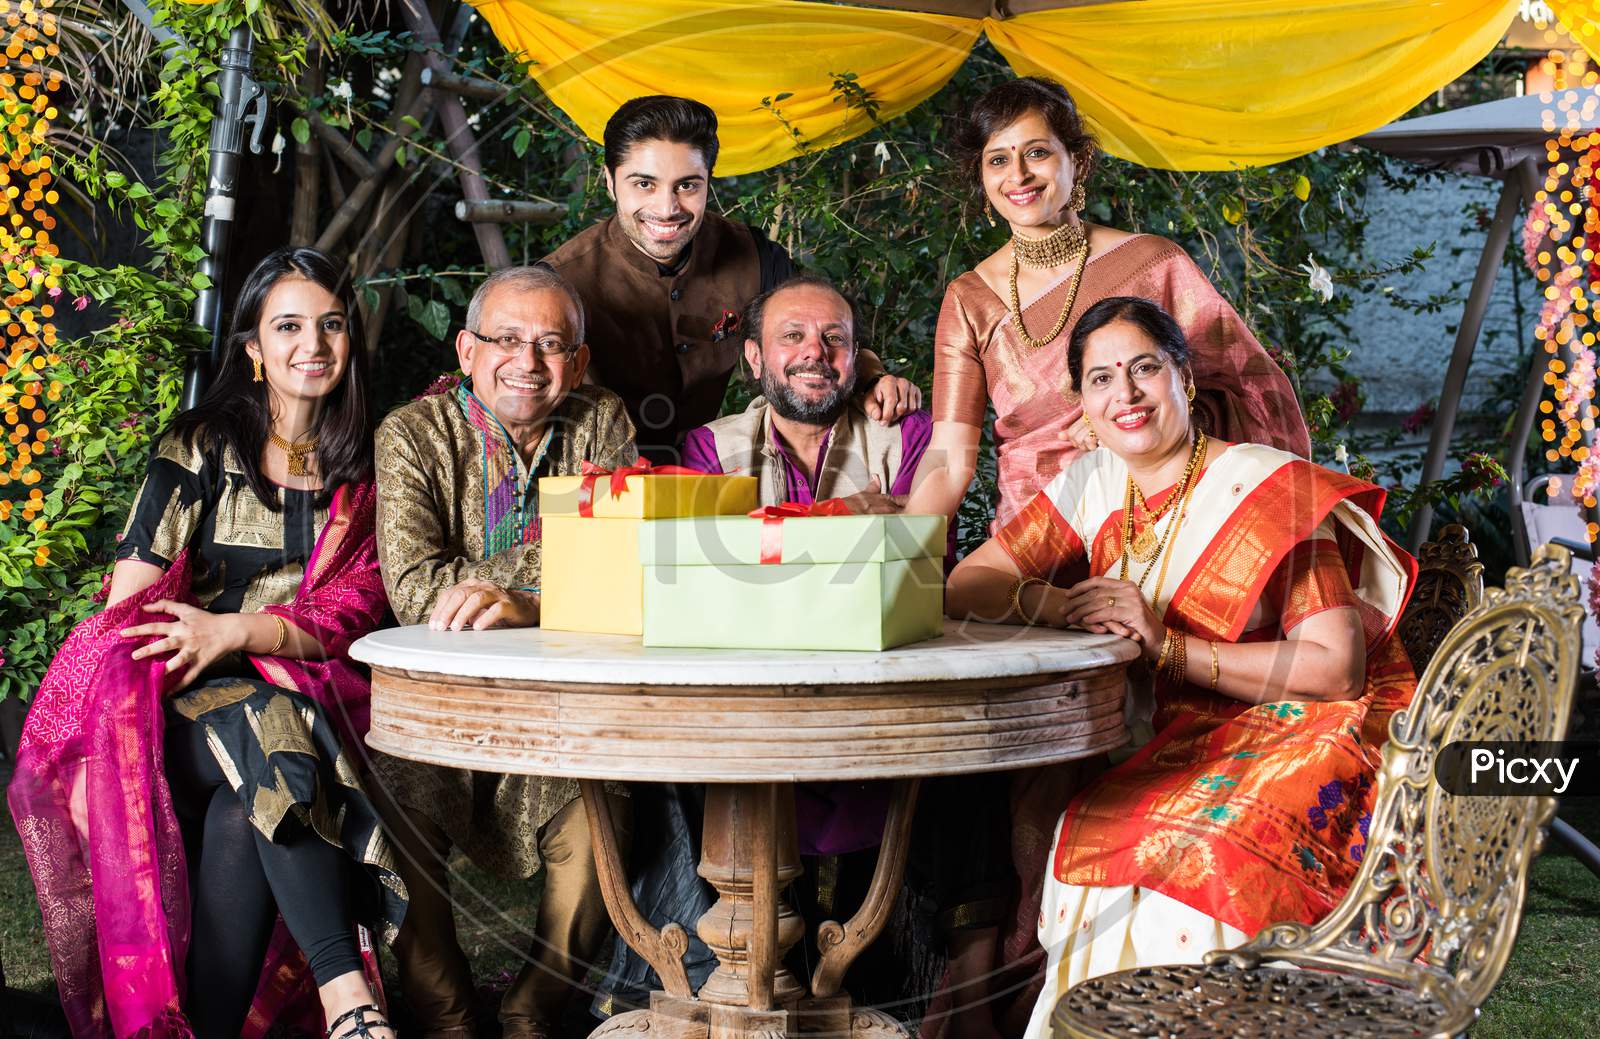 Group photo of indian family while celebrating festival